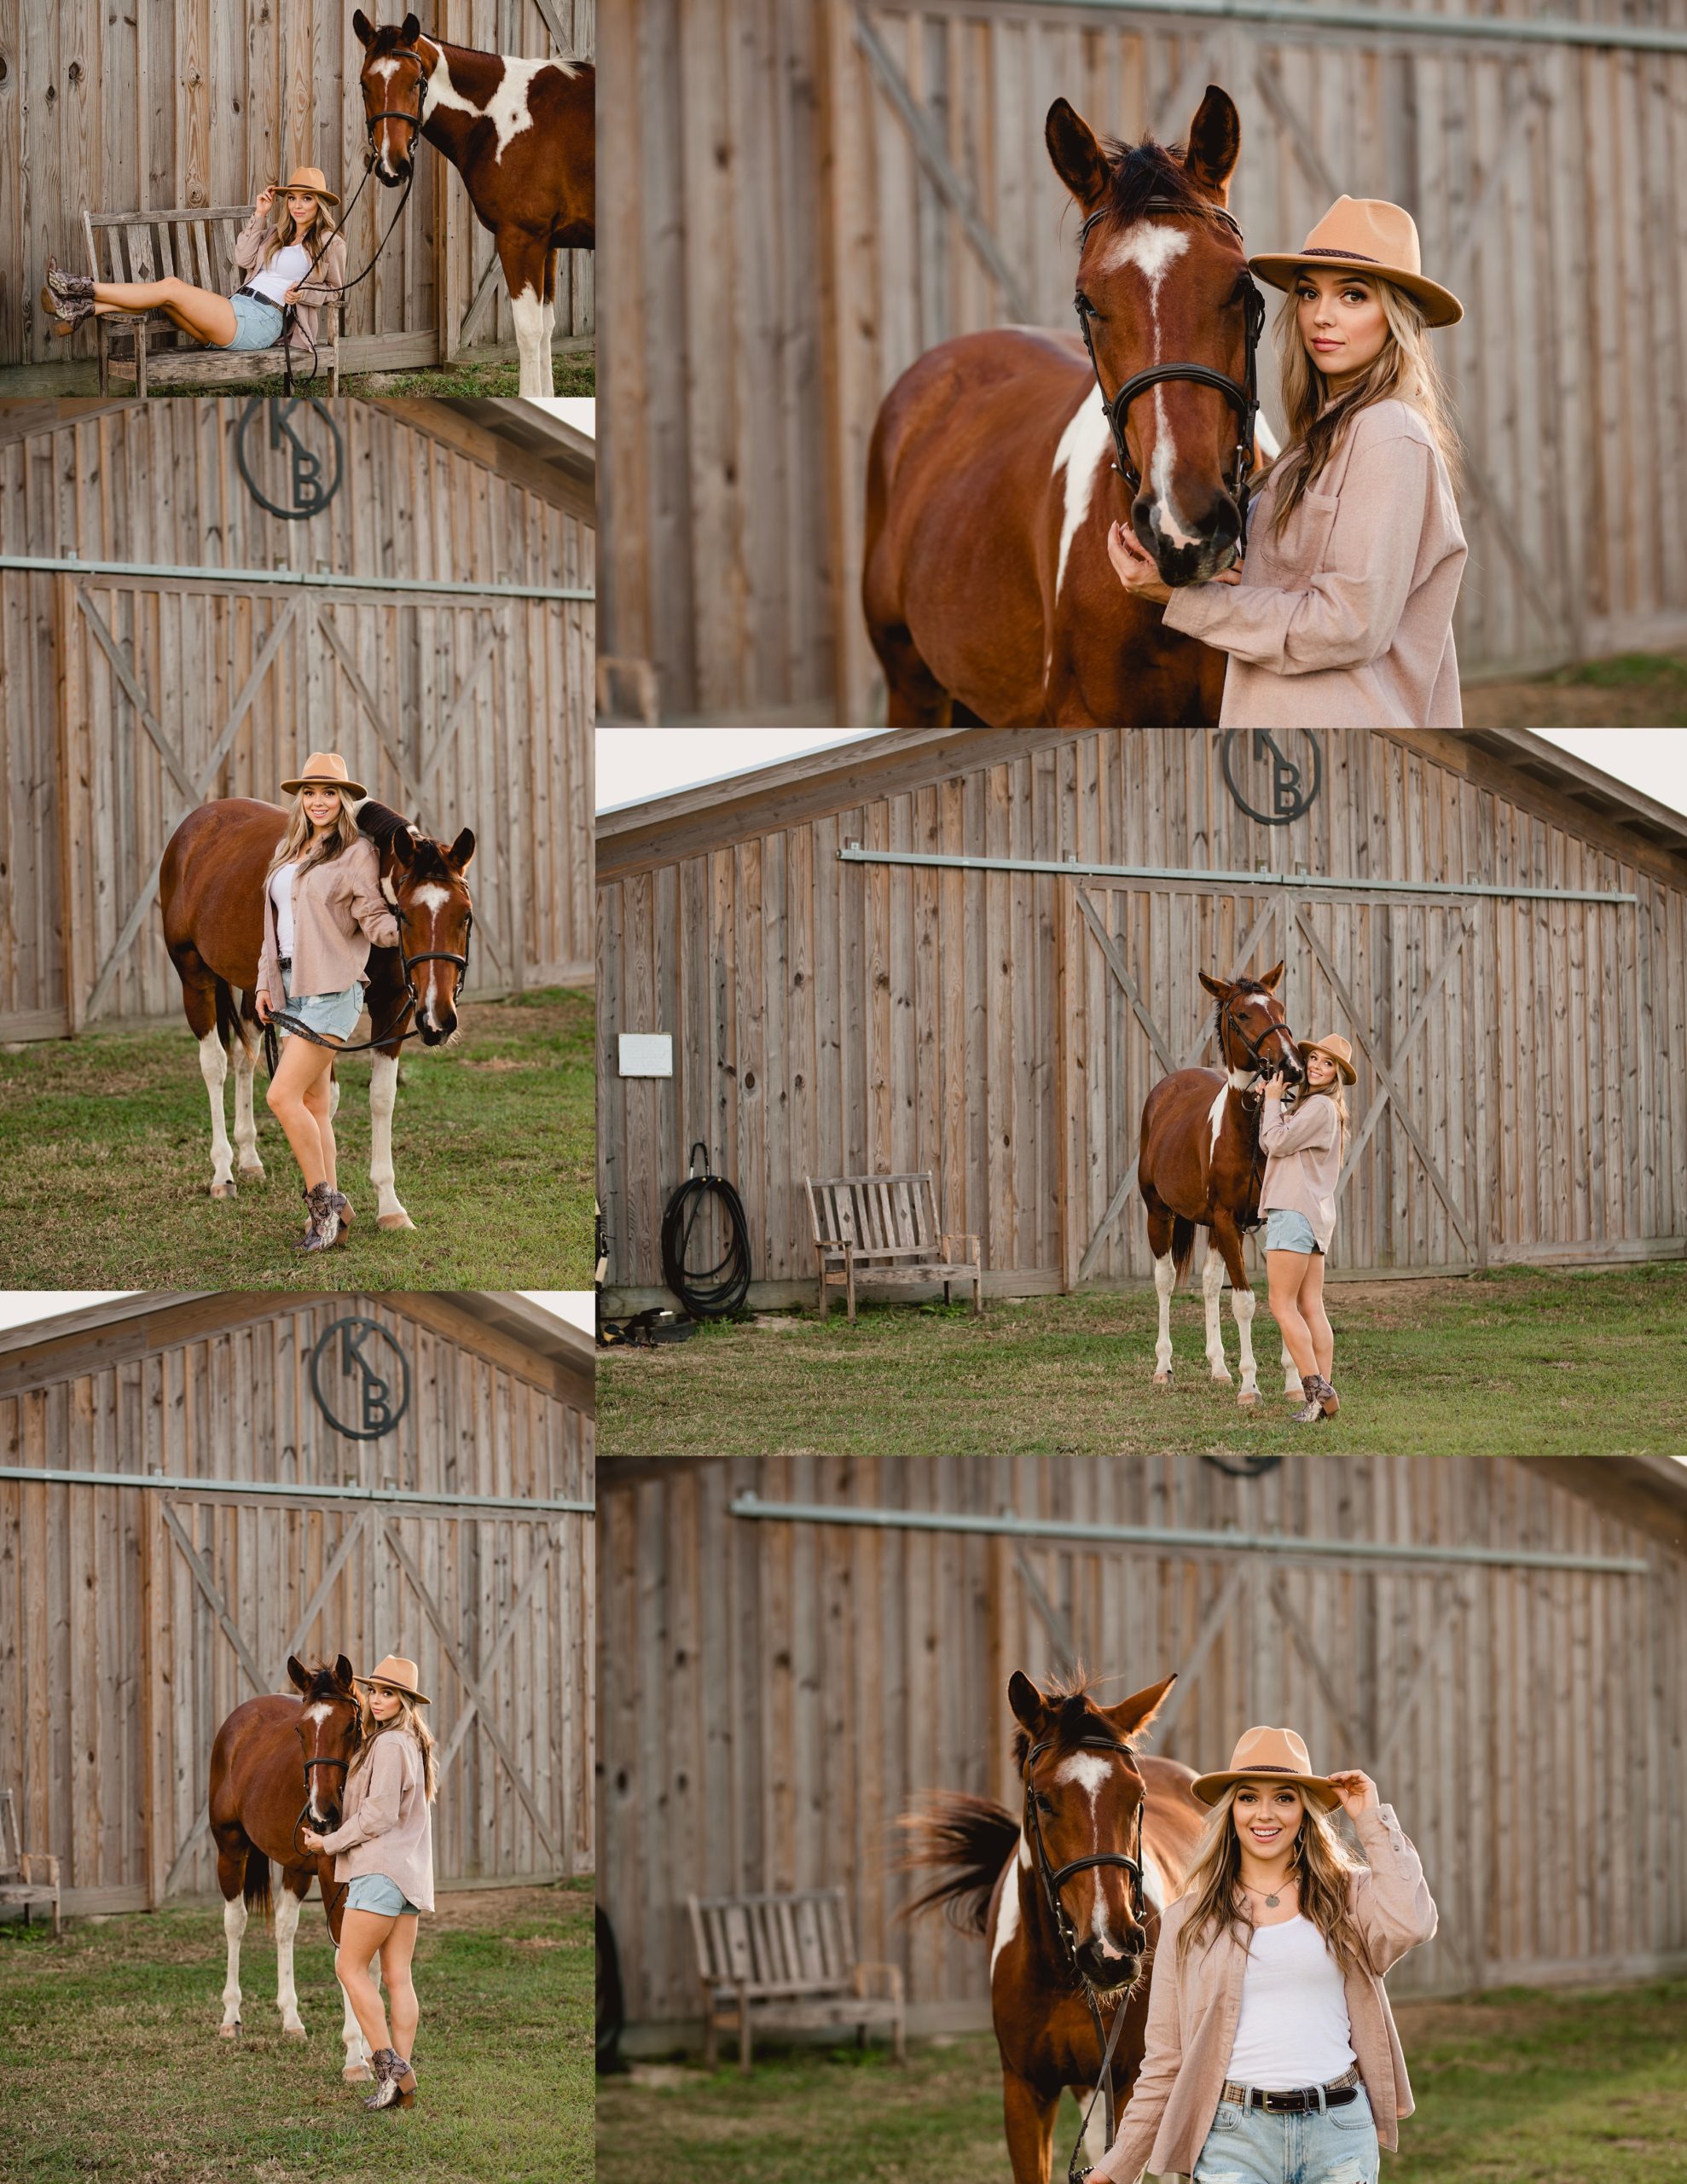 Rustic barn is the perfect scenery for horse and rider photos in Tallahassee, FL